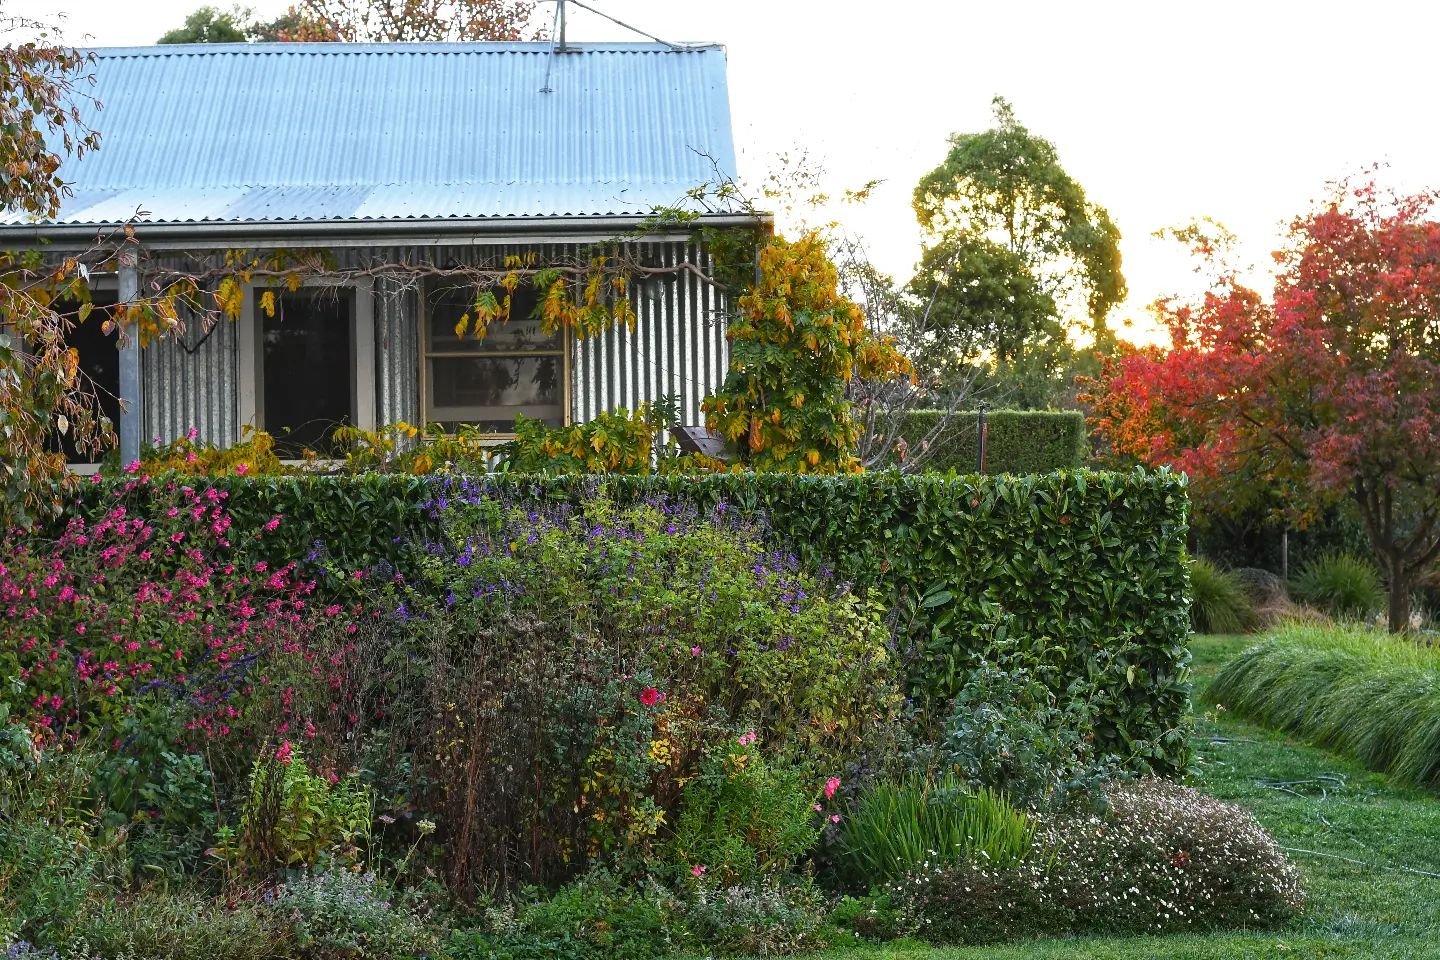 In Rosalie Ham's wonderful book, The Dressmaker, she describes how petunias sit around the base of a verandah post like frilly socks on an ankle. I love it - indeed, the garden dresses a house, clothes it with colour and texture, and warms it like a 